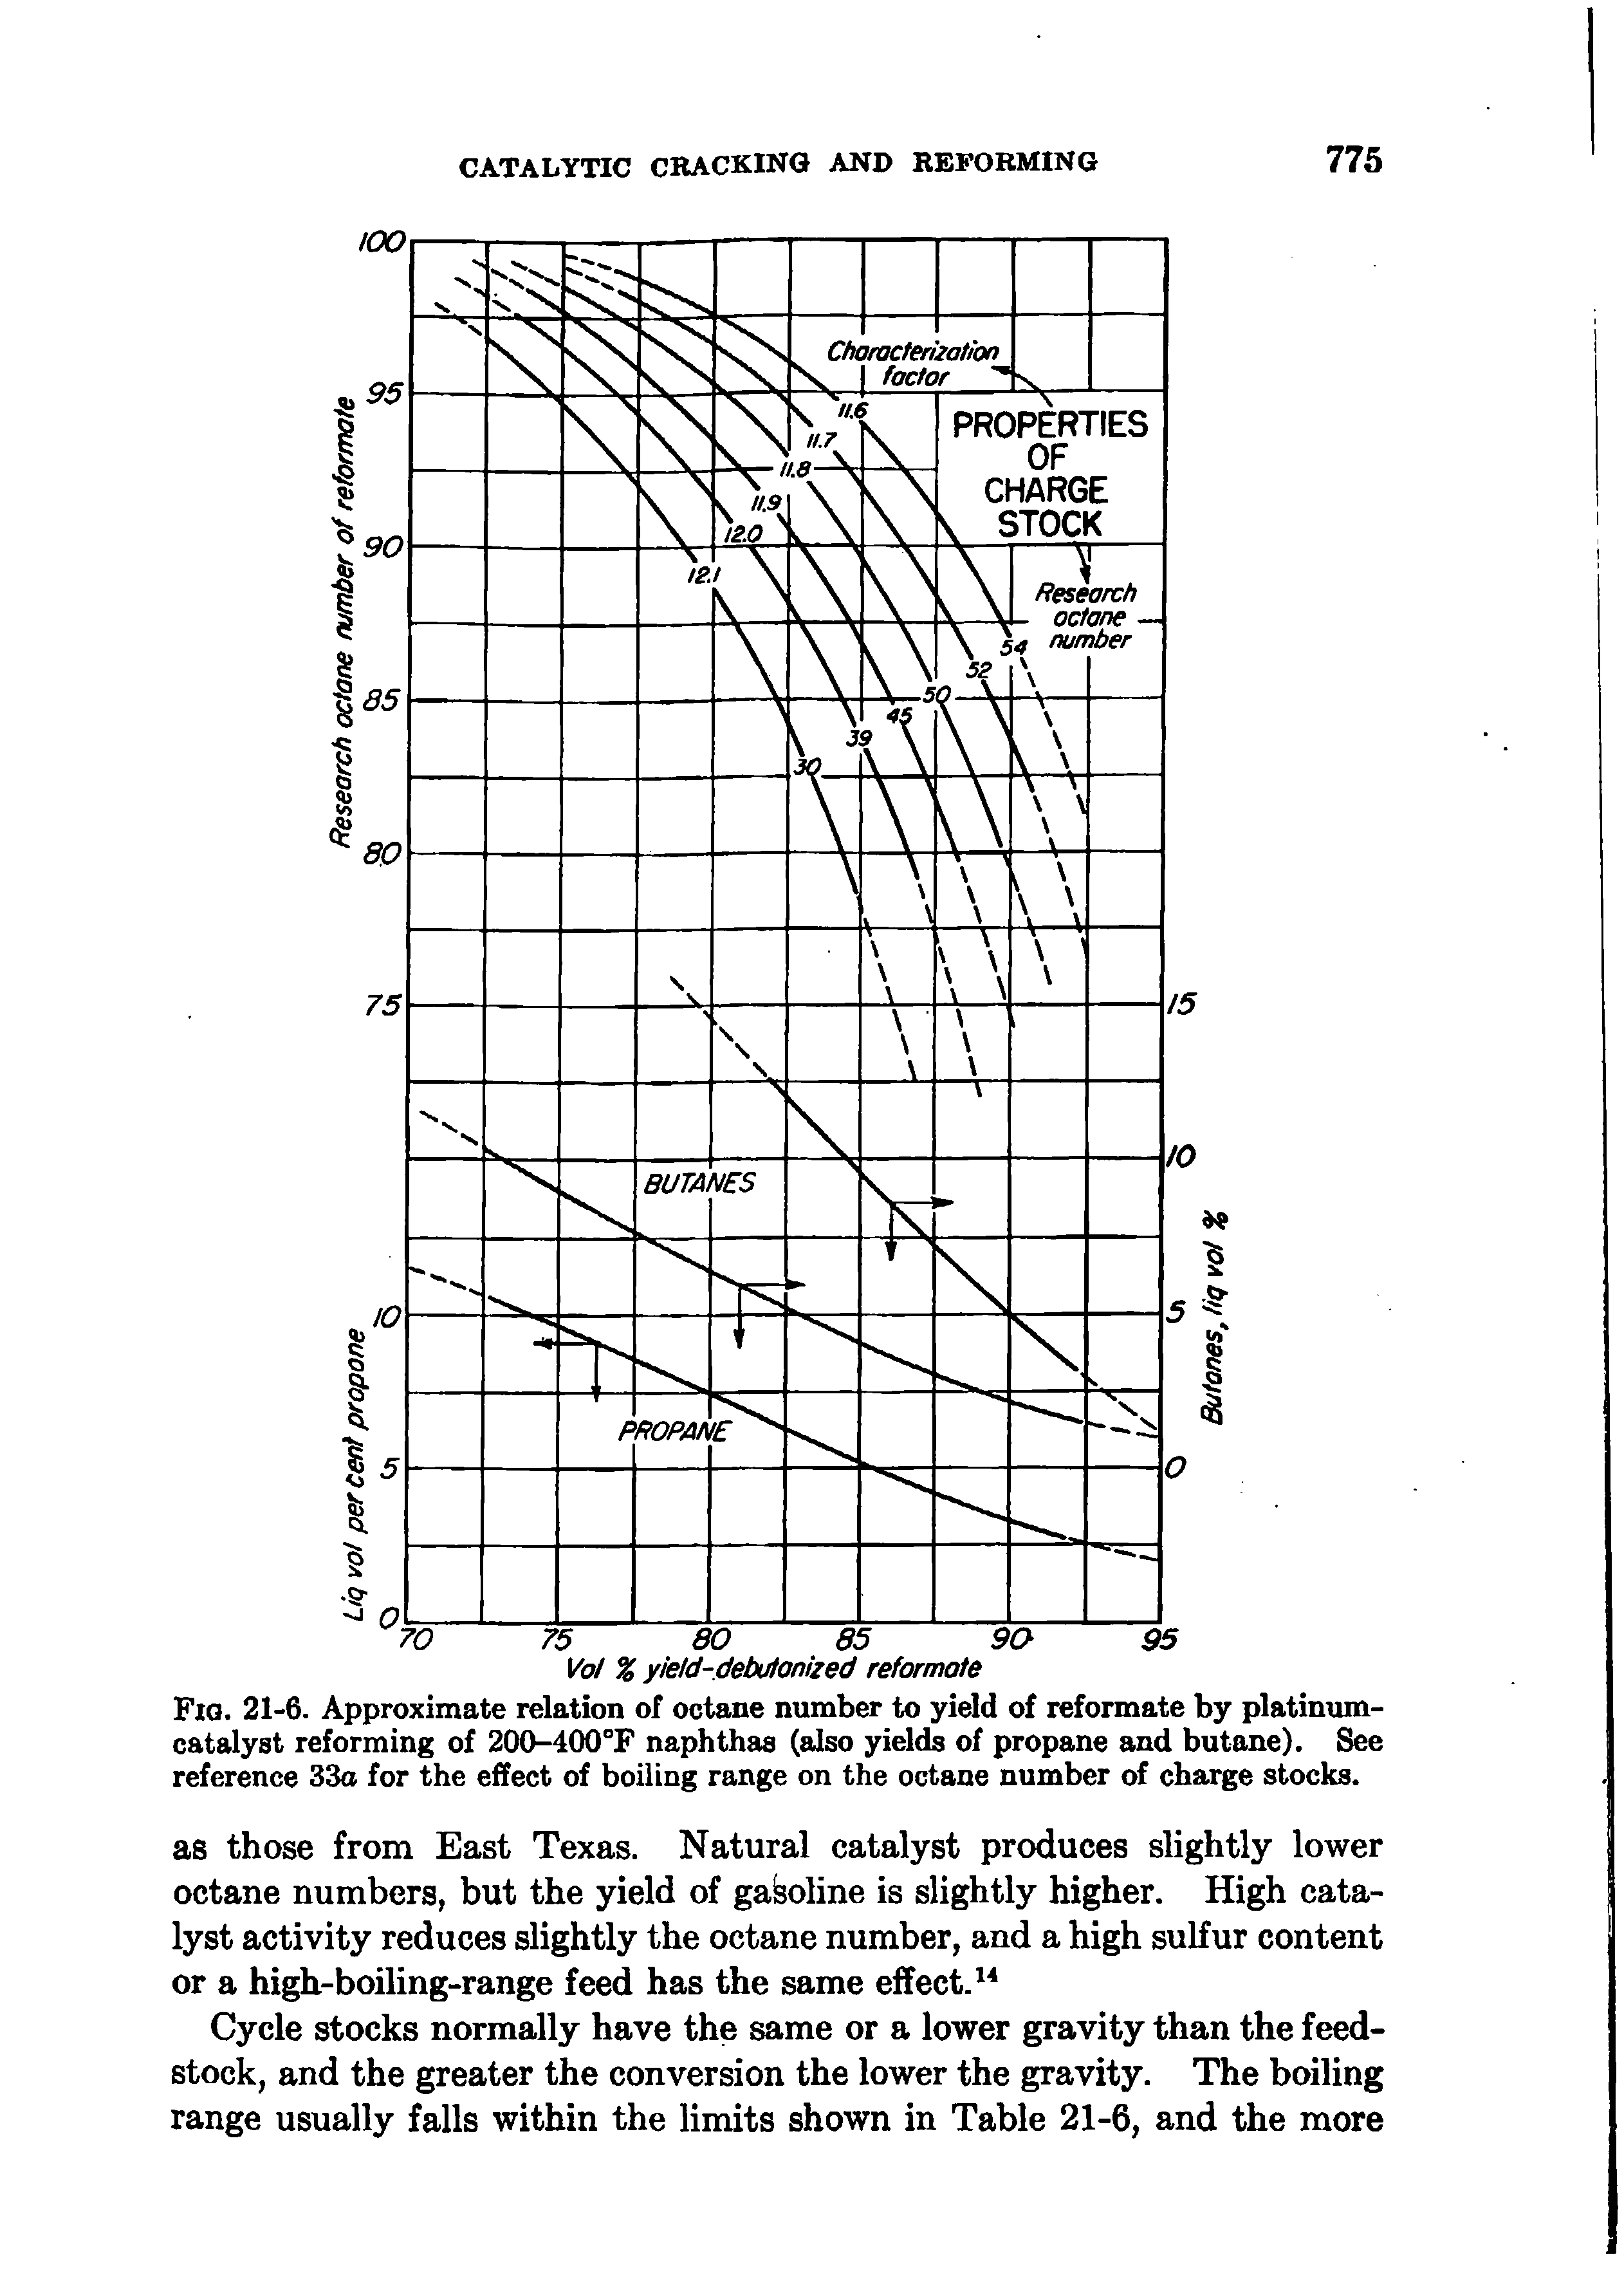 Fig. 21-6. Approximate relation of octane number to yield of reformate by platinum-catalyst reforming of 200-400°F naphthas (also yields of propane and butane). See reference 33a for the effect of boiling range on the octane number of chaise stocks.